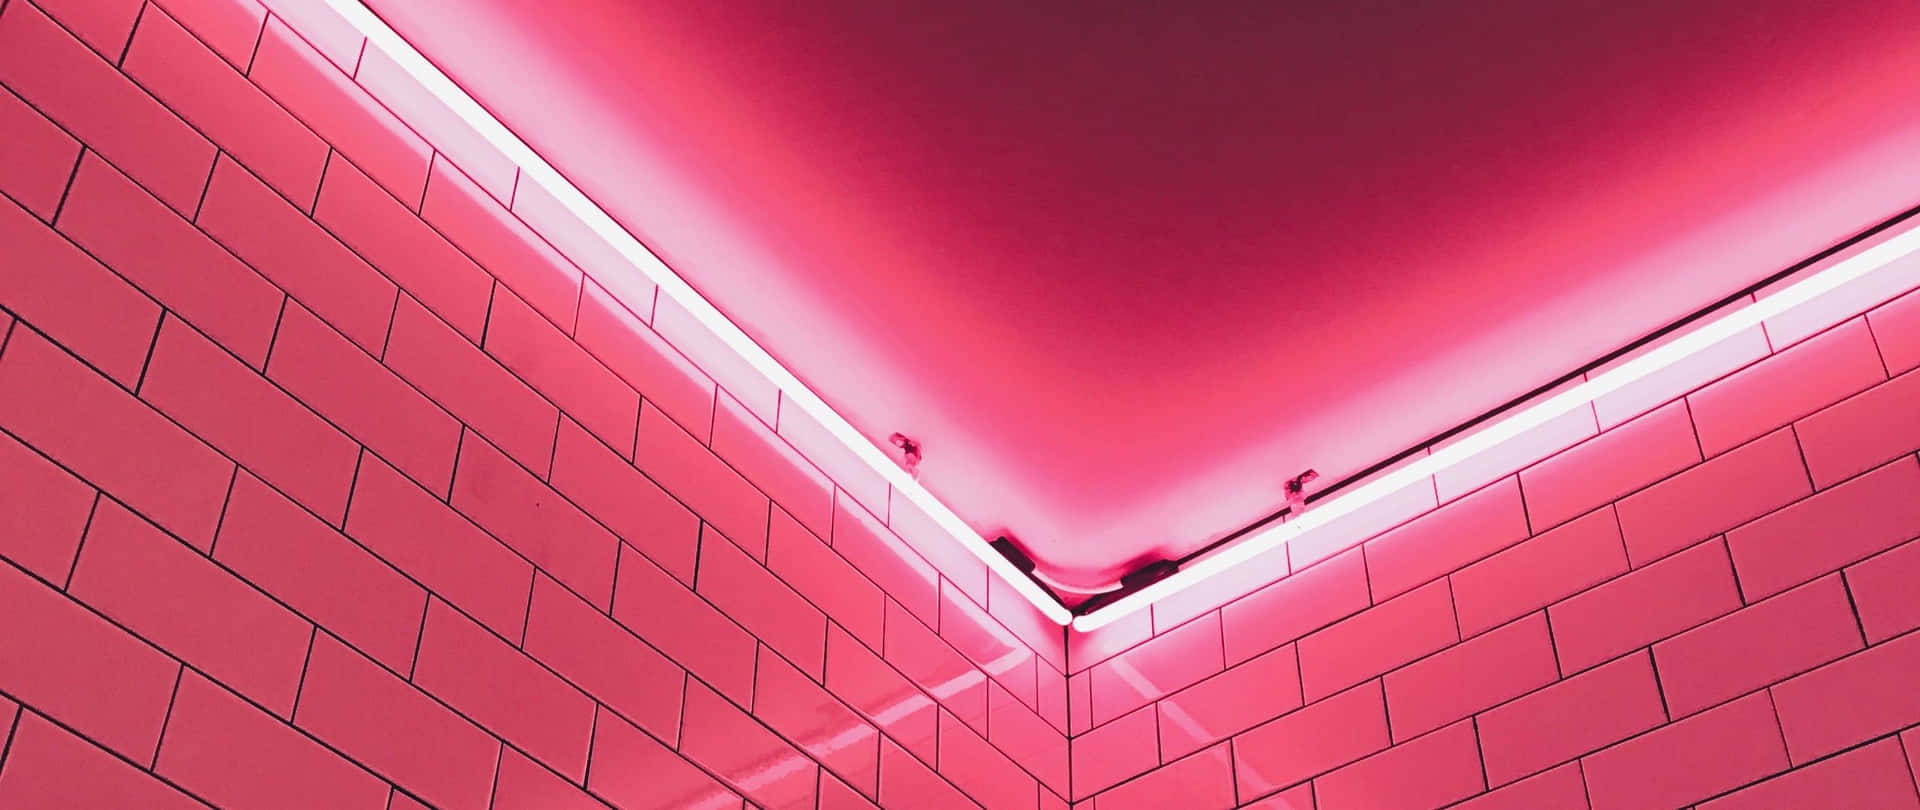 Red Aesthetic Laptop Bricks Wall Background